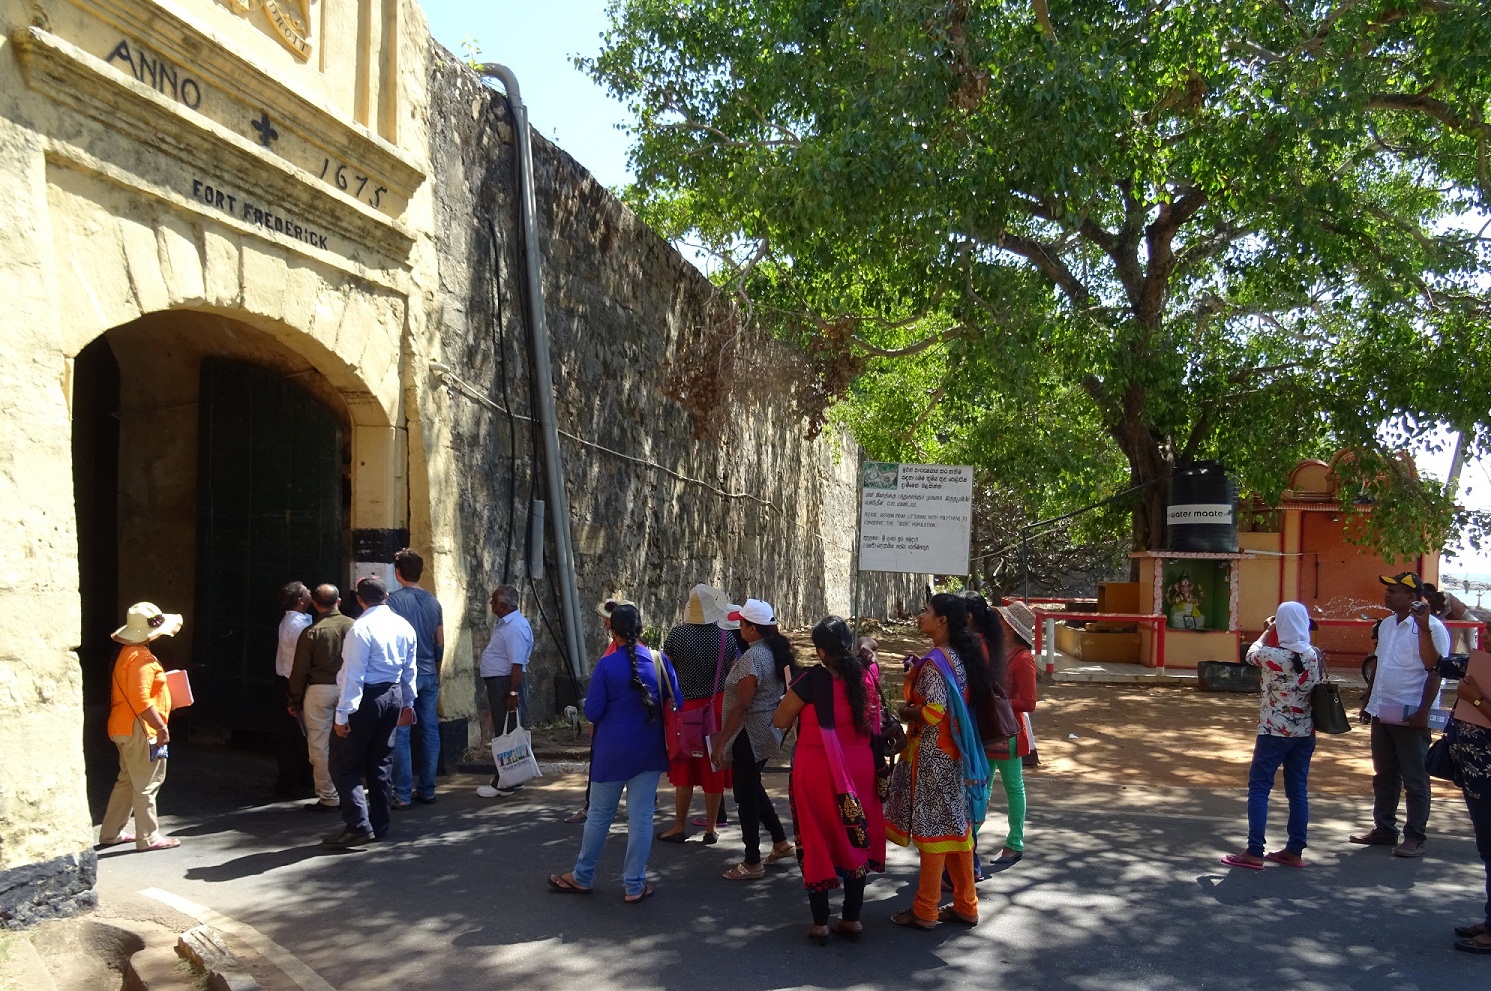 Field trip to former Dutch Fort Frederick at Trincomalee with participants of the adaptive reuse workshop. Sri Lanka, 2015. Photo by Frank Strolenberg, RCE.